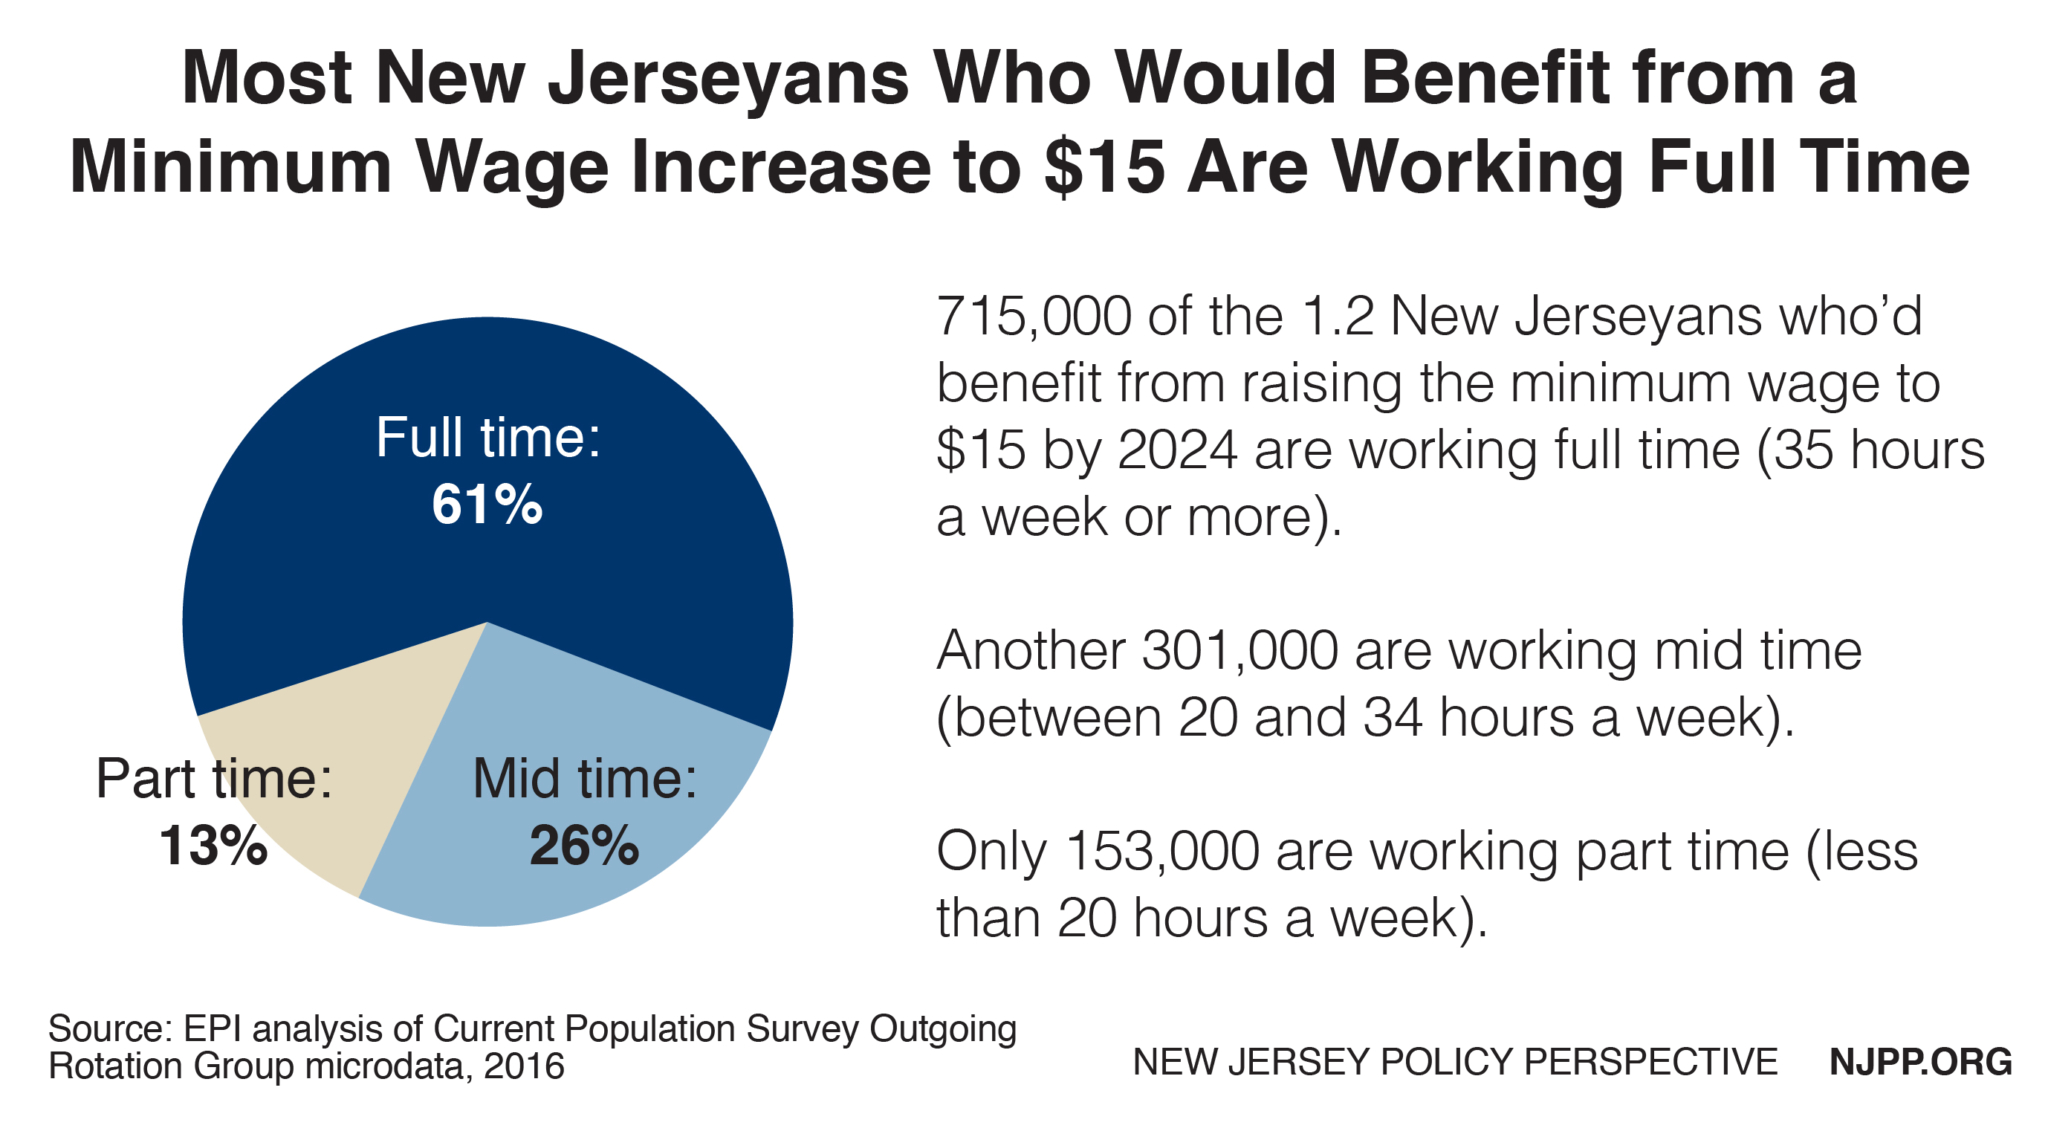 Raising the Minimum Wage to 15 by 2024 Would Boost the Pay of 1.2